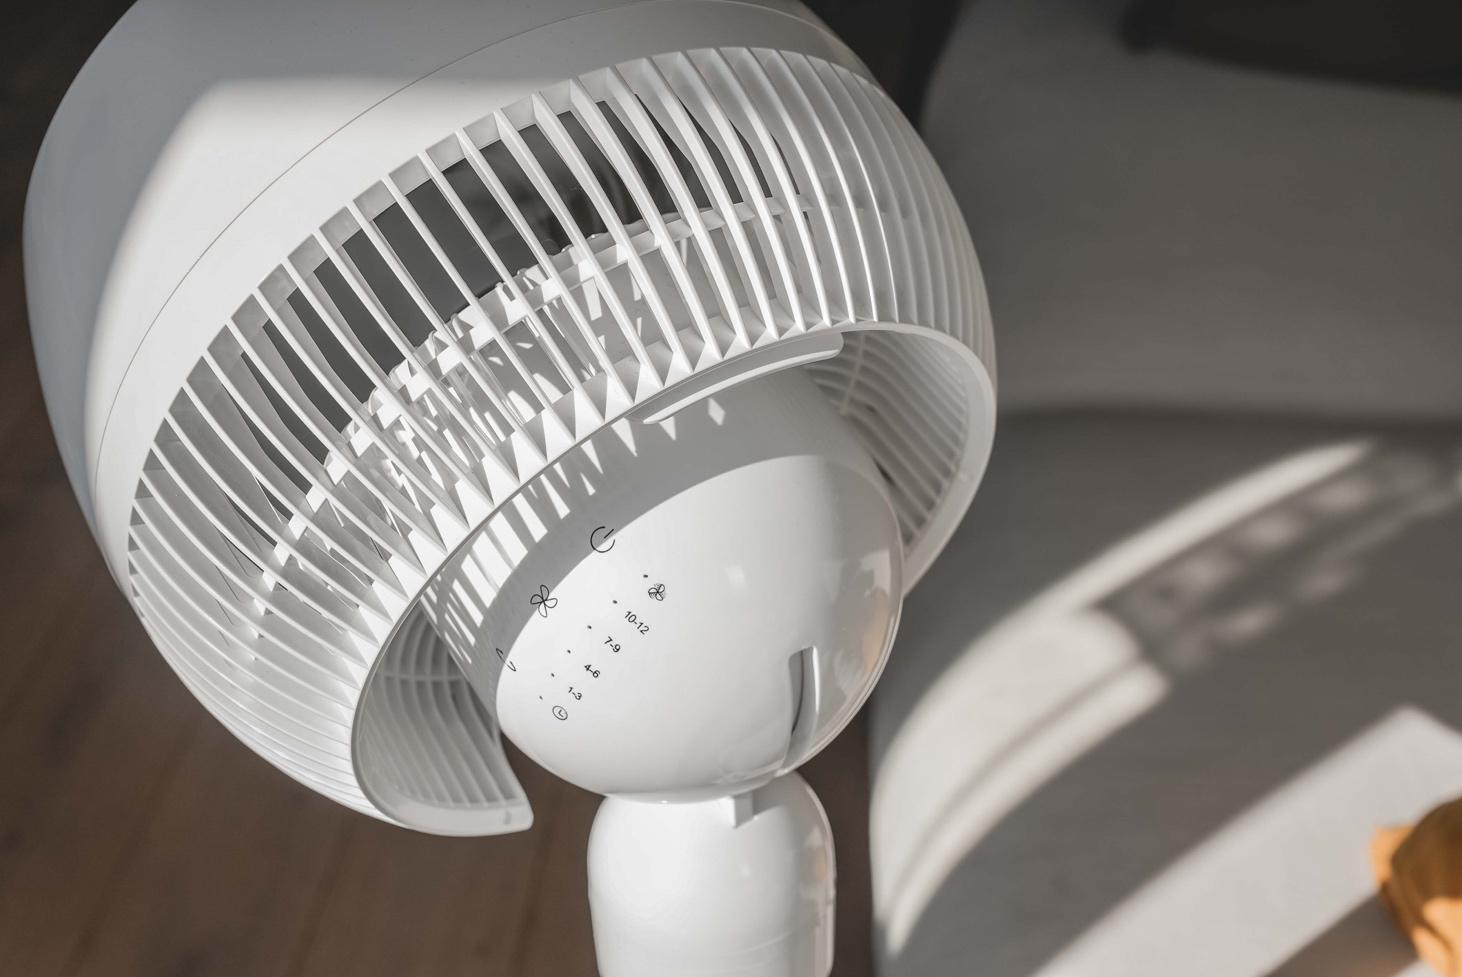 A fan on a table

Description automatically generated with low confidence